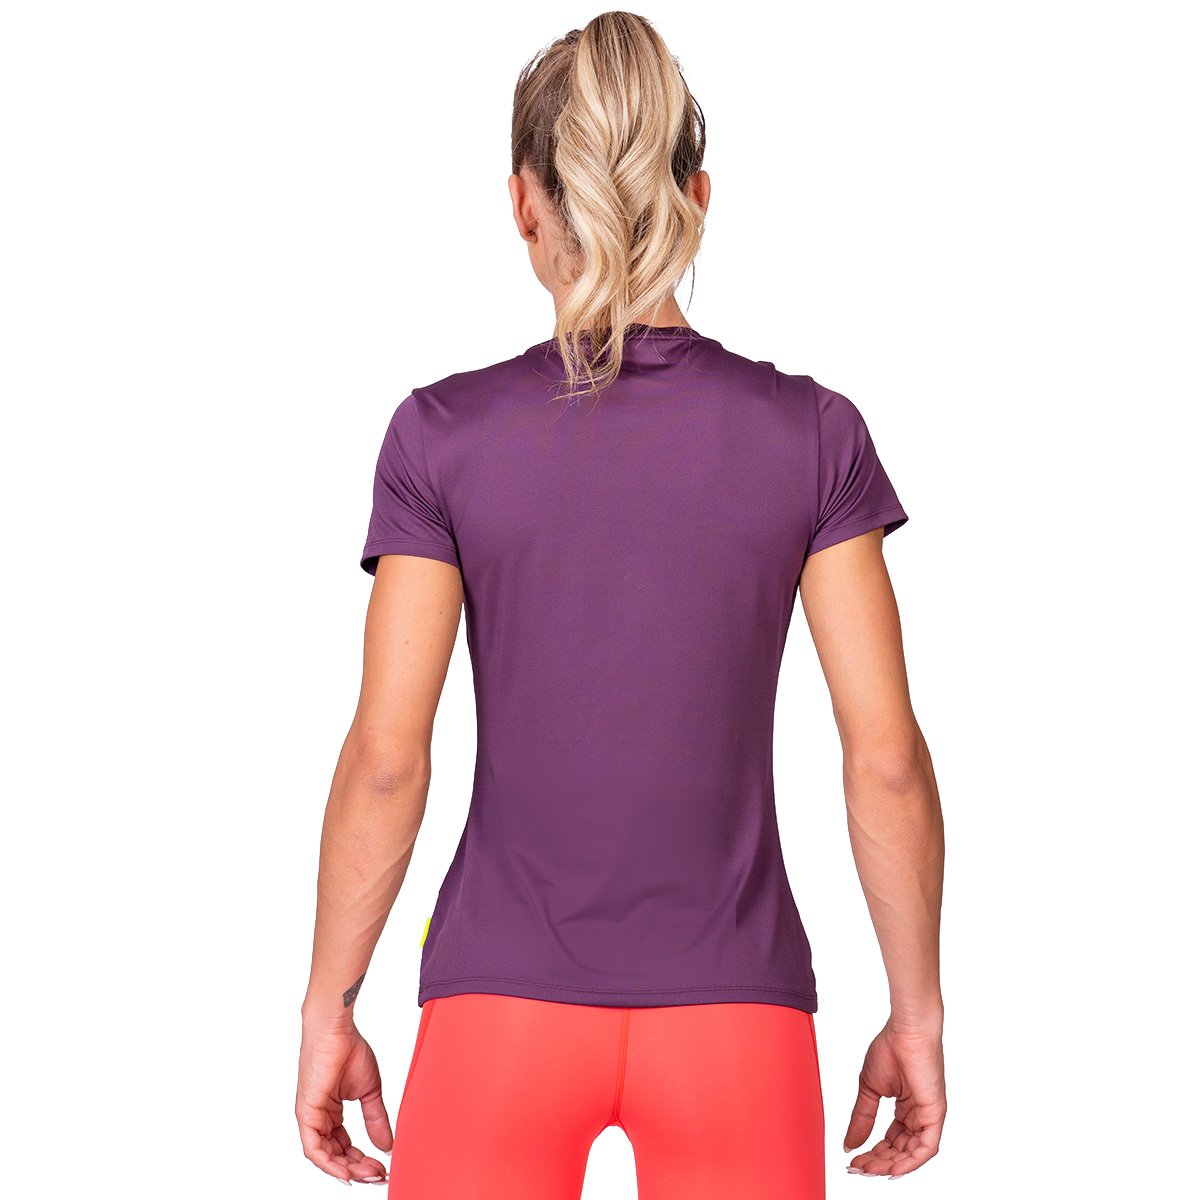 Activewear 110PRCNT Tight-Fit T-Shirt for Women